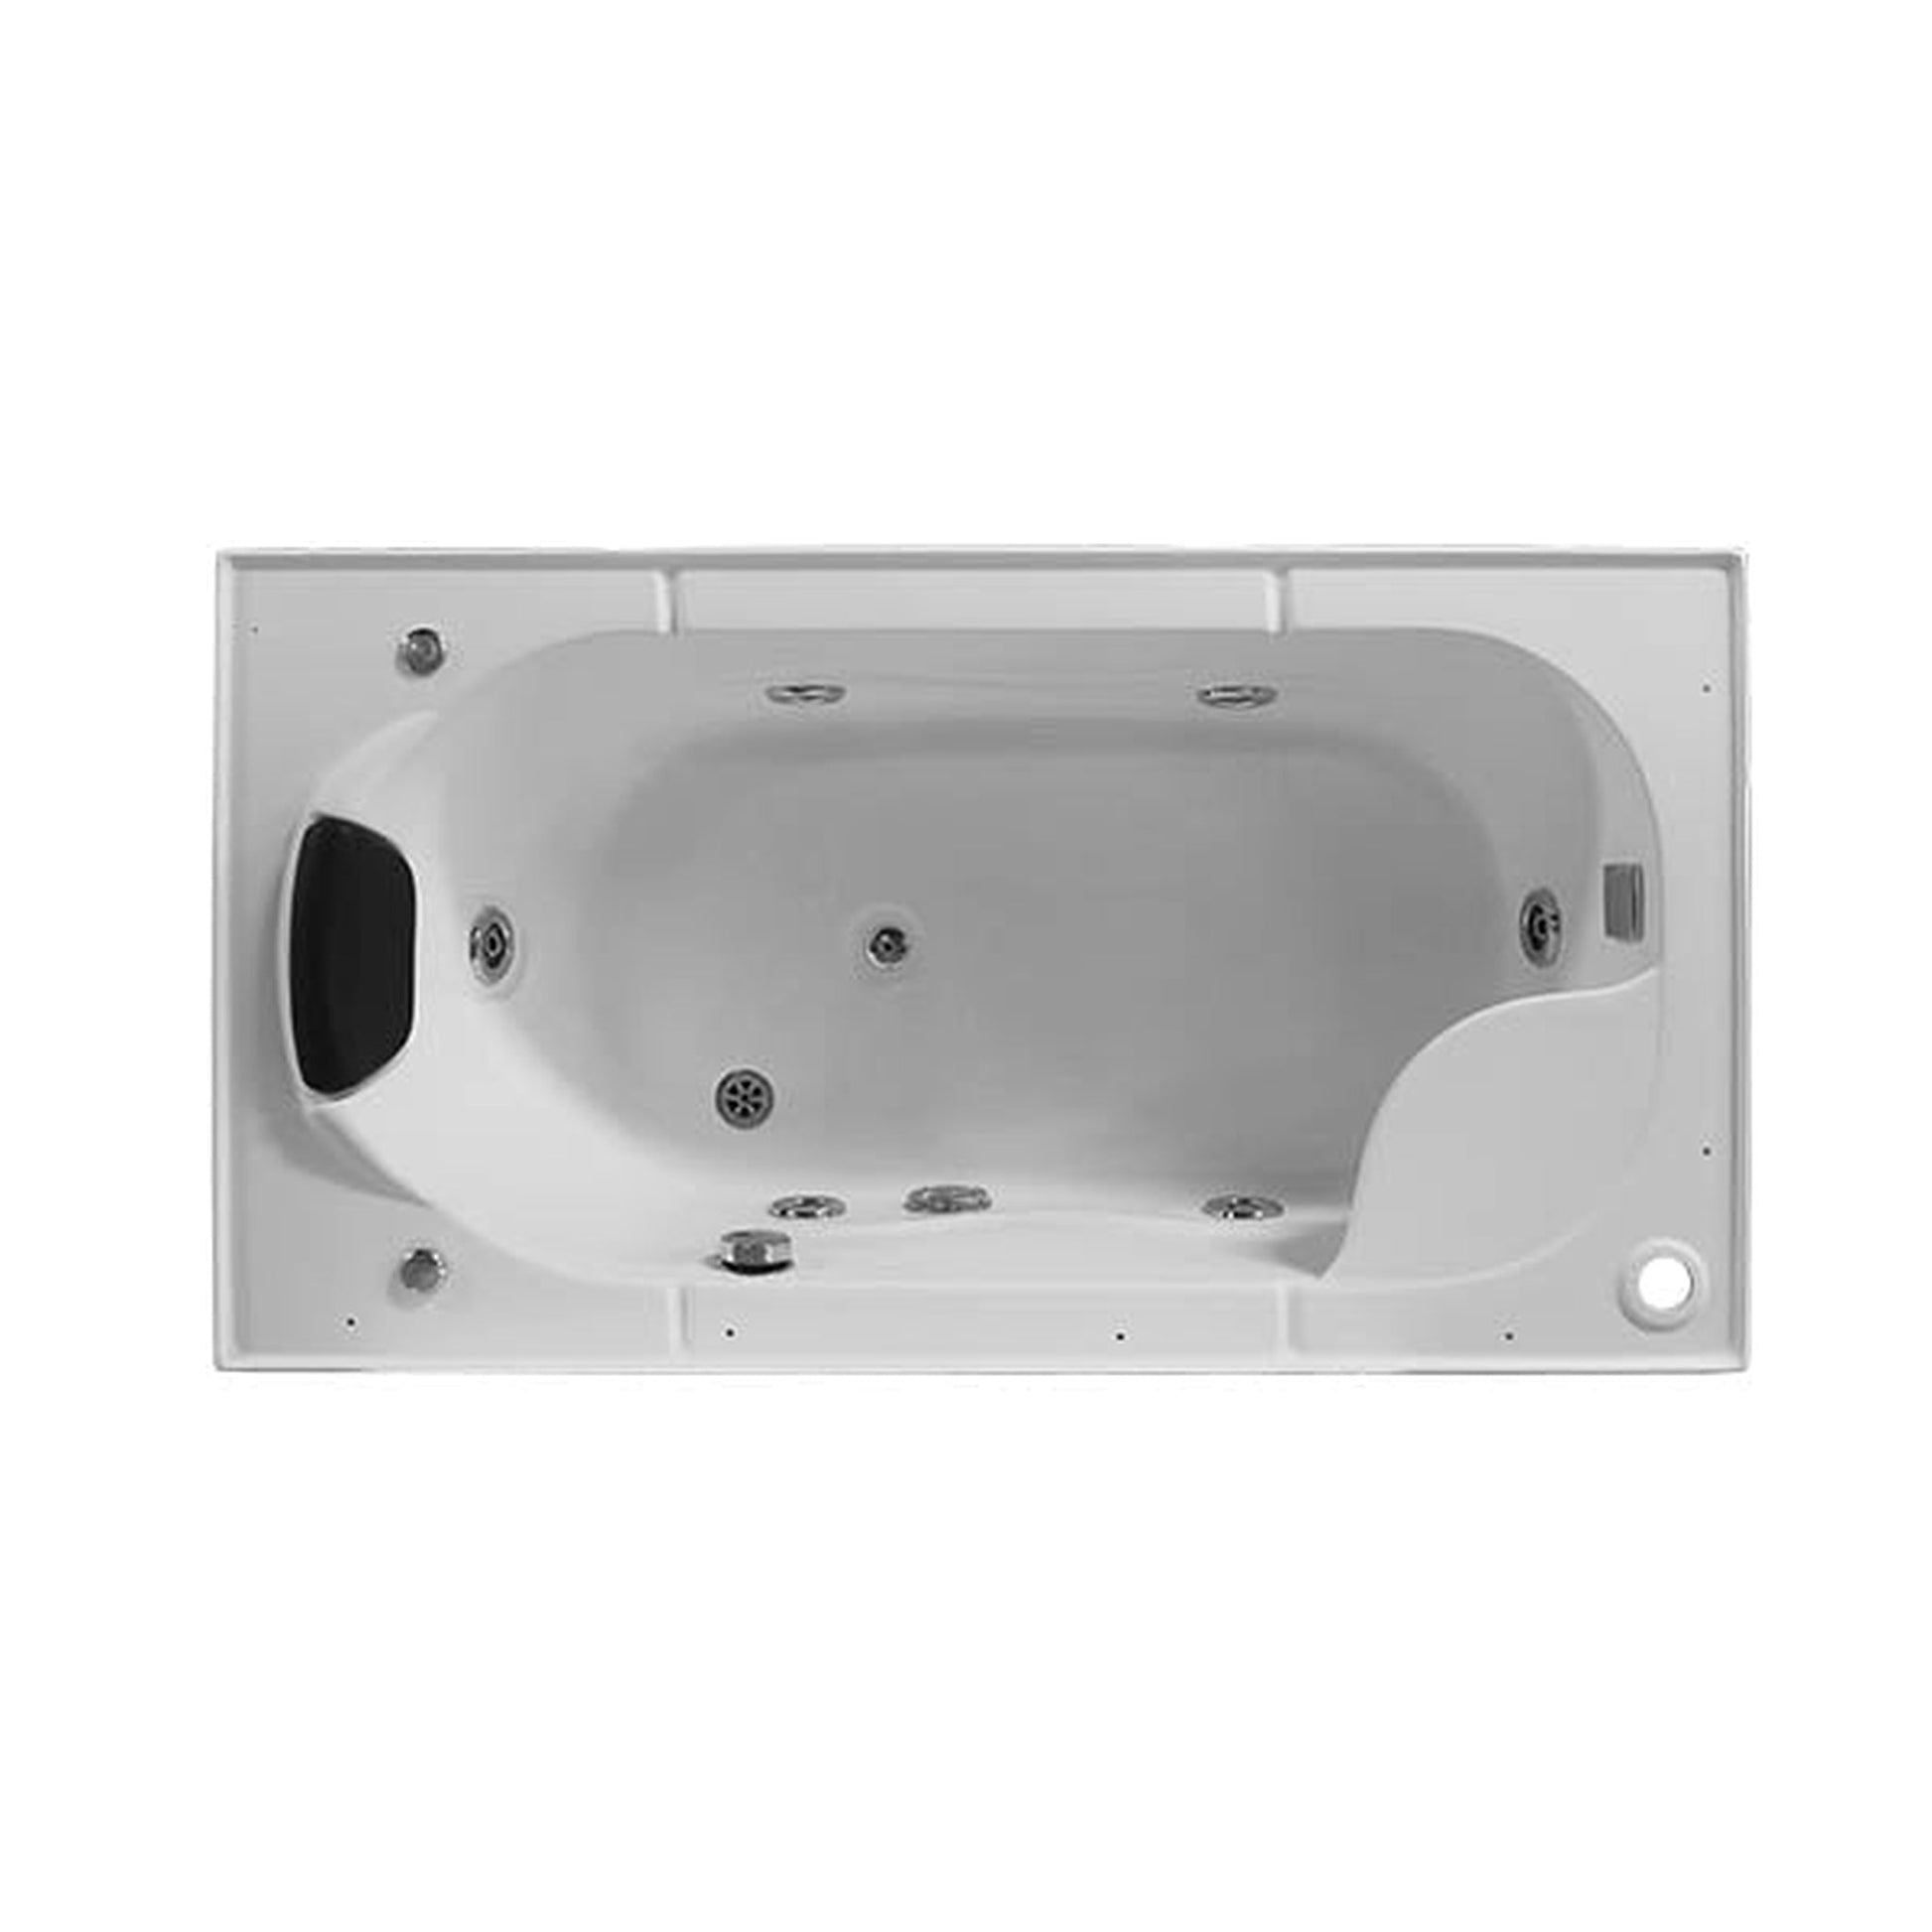 Mesa 60" x 33" x 85" Clear Tempered Glass Freestanding Combination Steam Shower With Jetted Tub, Left-Side Control Panel Configuration, 3kW Steam Generator and 12 Acupuncture Water Body Jets